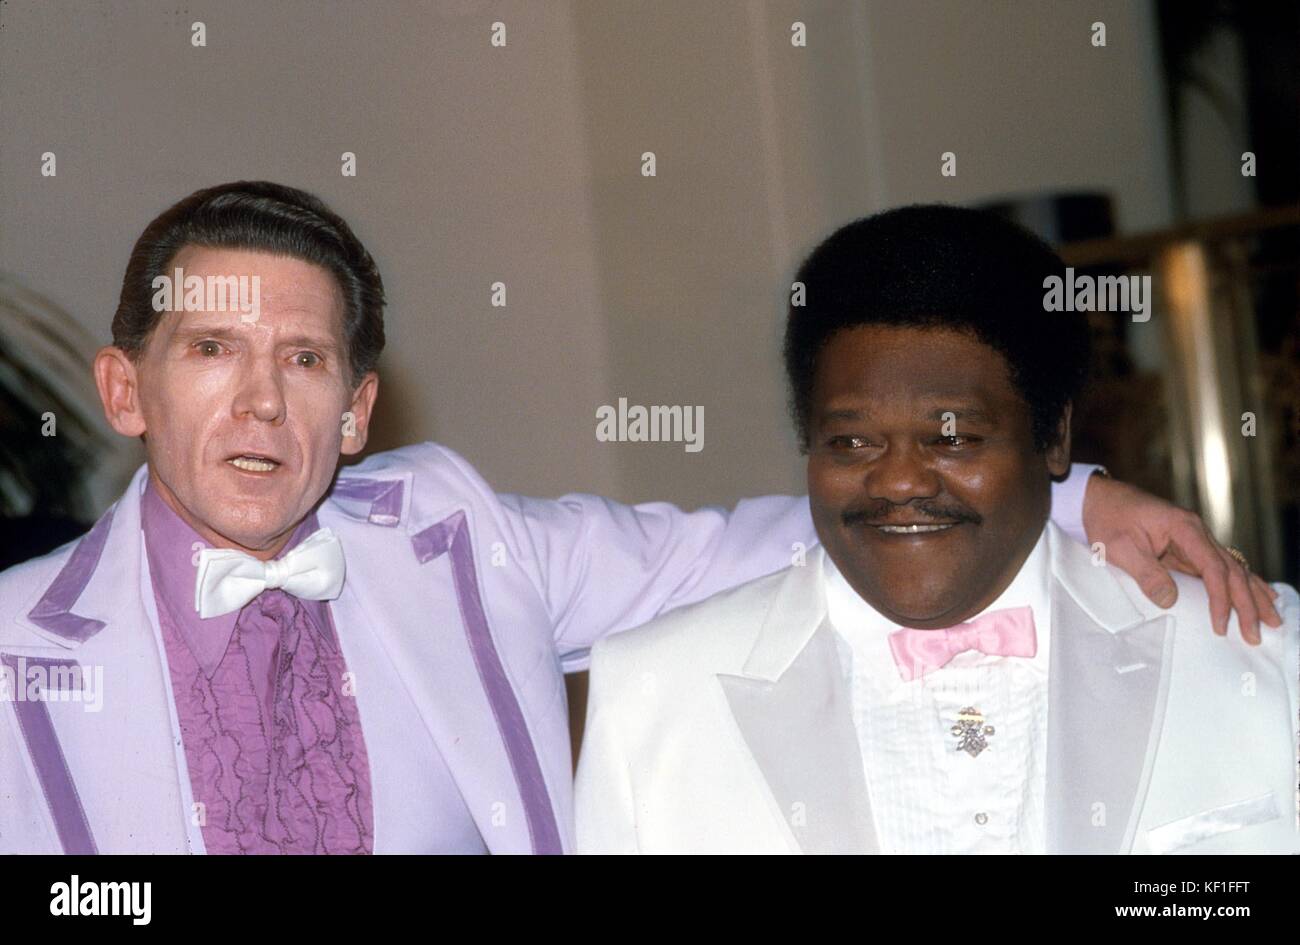 October 25, 2017 - FATS DOMINO, one of the most influential rock and roll  performers of the 1950s and 60s, dies aged 89. Pictured: c1970 - JERRY LEE  LEWIS (L) with FATS